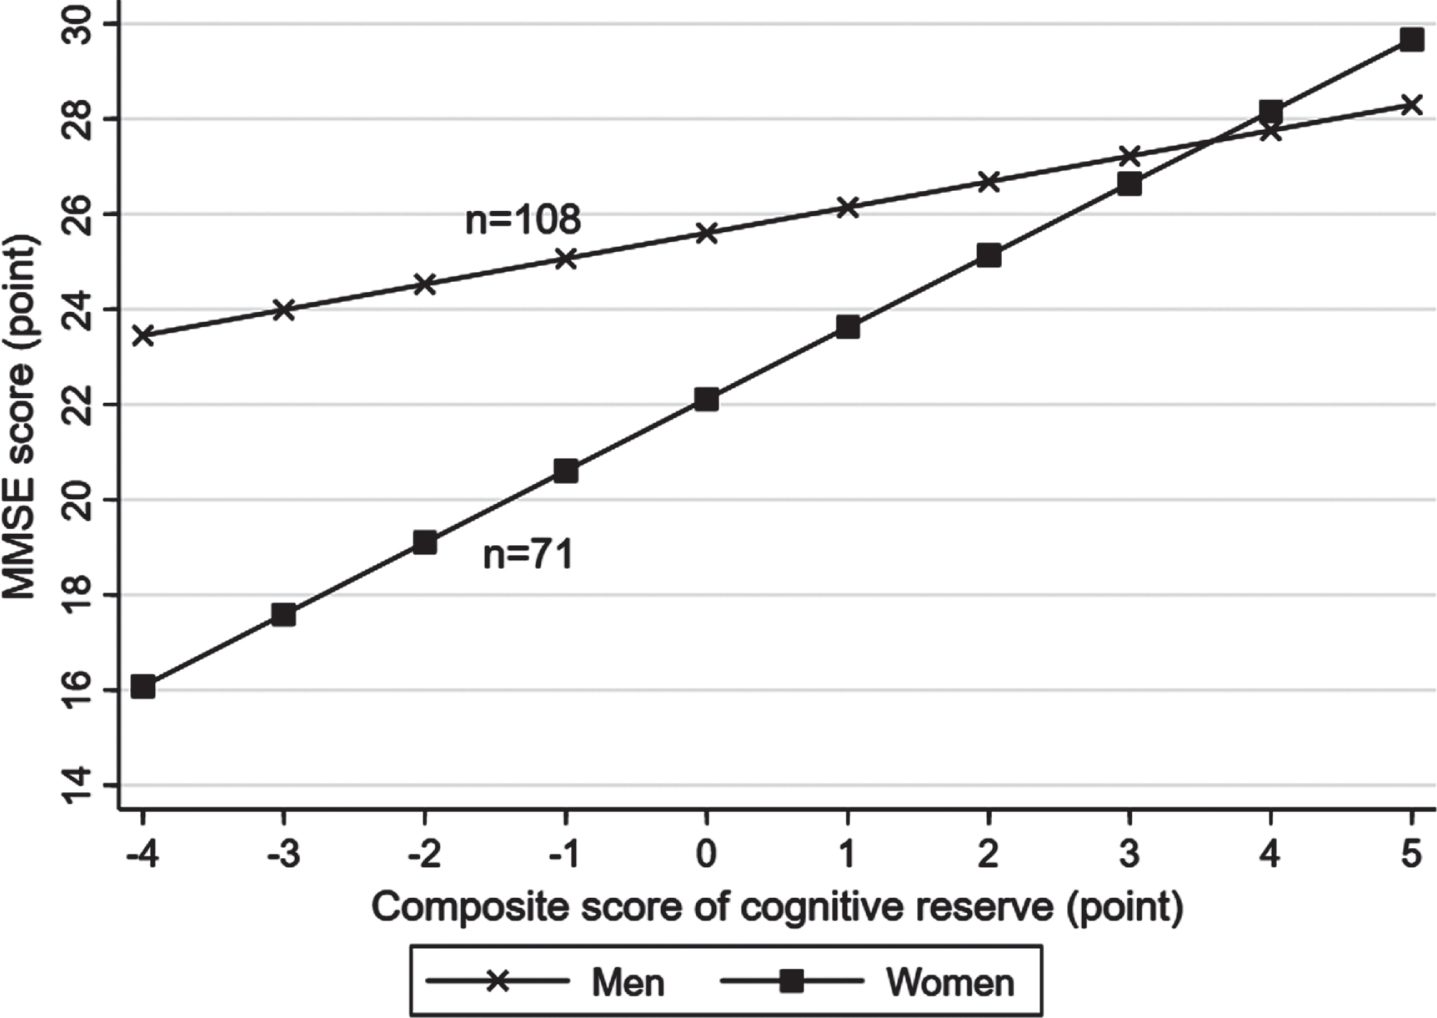 Associations of lifelong cognitive reserve with the Mini-Mental State Examination (MMSE) score by sex (n = 179). Models were adjusted for age, sex, smoking, alcohol intake, hypertension, hyperlipidemia, diabetes mellitus, stroke, coronary heart disease, hippocampal volume, ventricular volume, volume of white matter hyperintensity, volume of total grey matter, volume of total white matter, and lacunes.